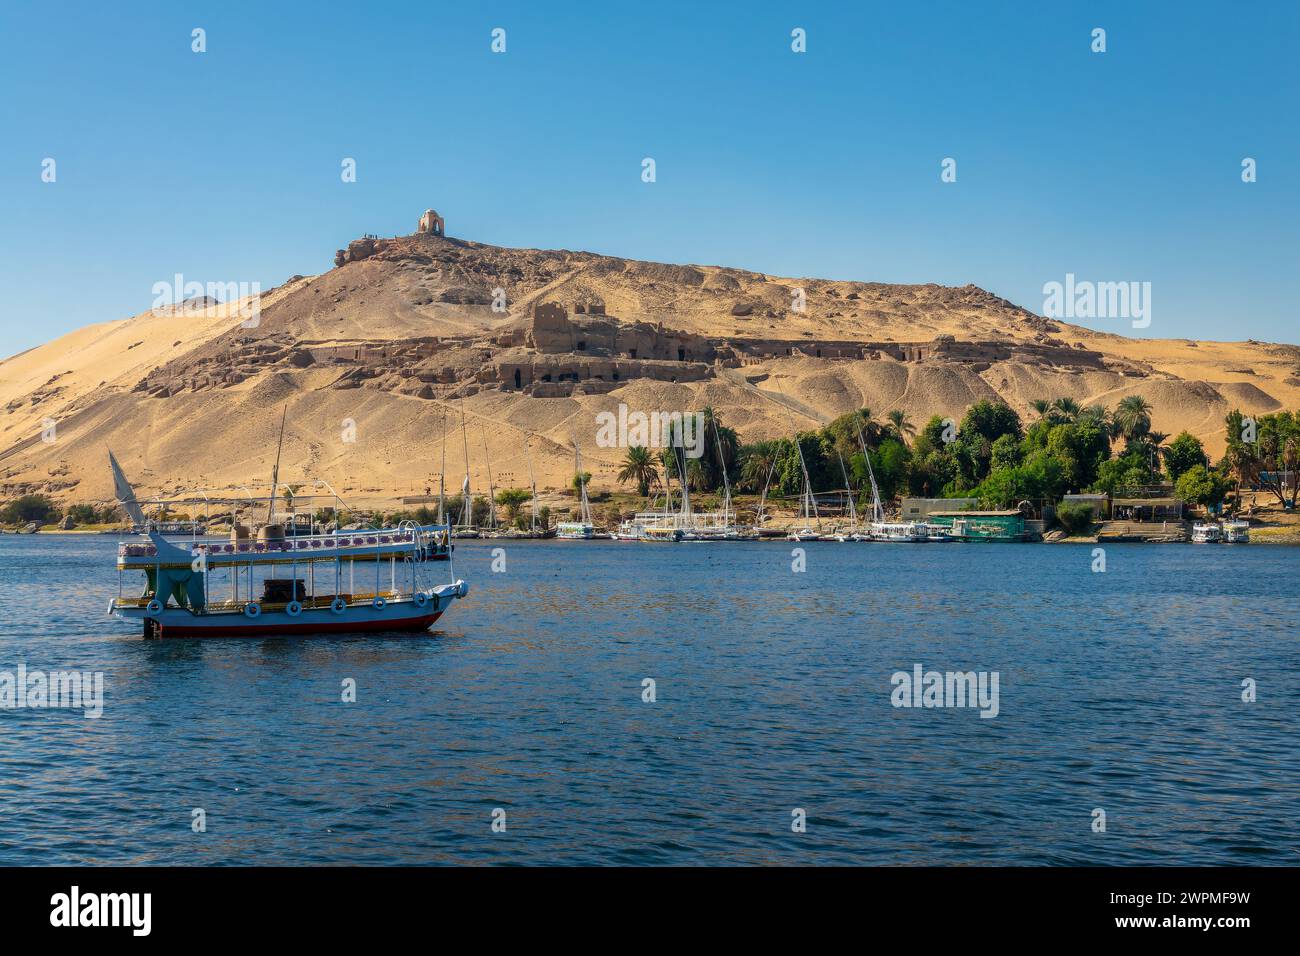 Dome of Abu Al-Hawa (Qubbet el-Hawa) or Dome of the Wind and the Nile river in Aswan, Egypt Stock Photo